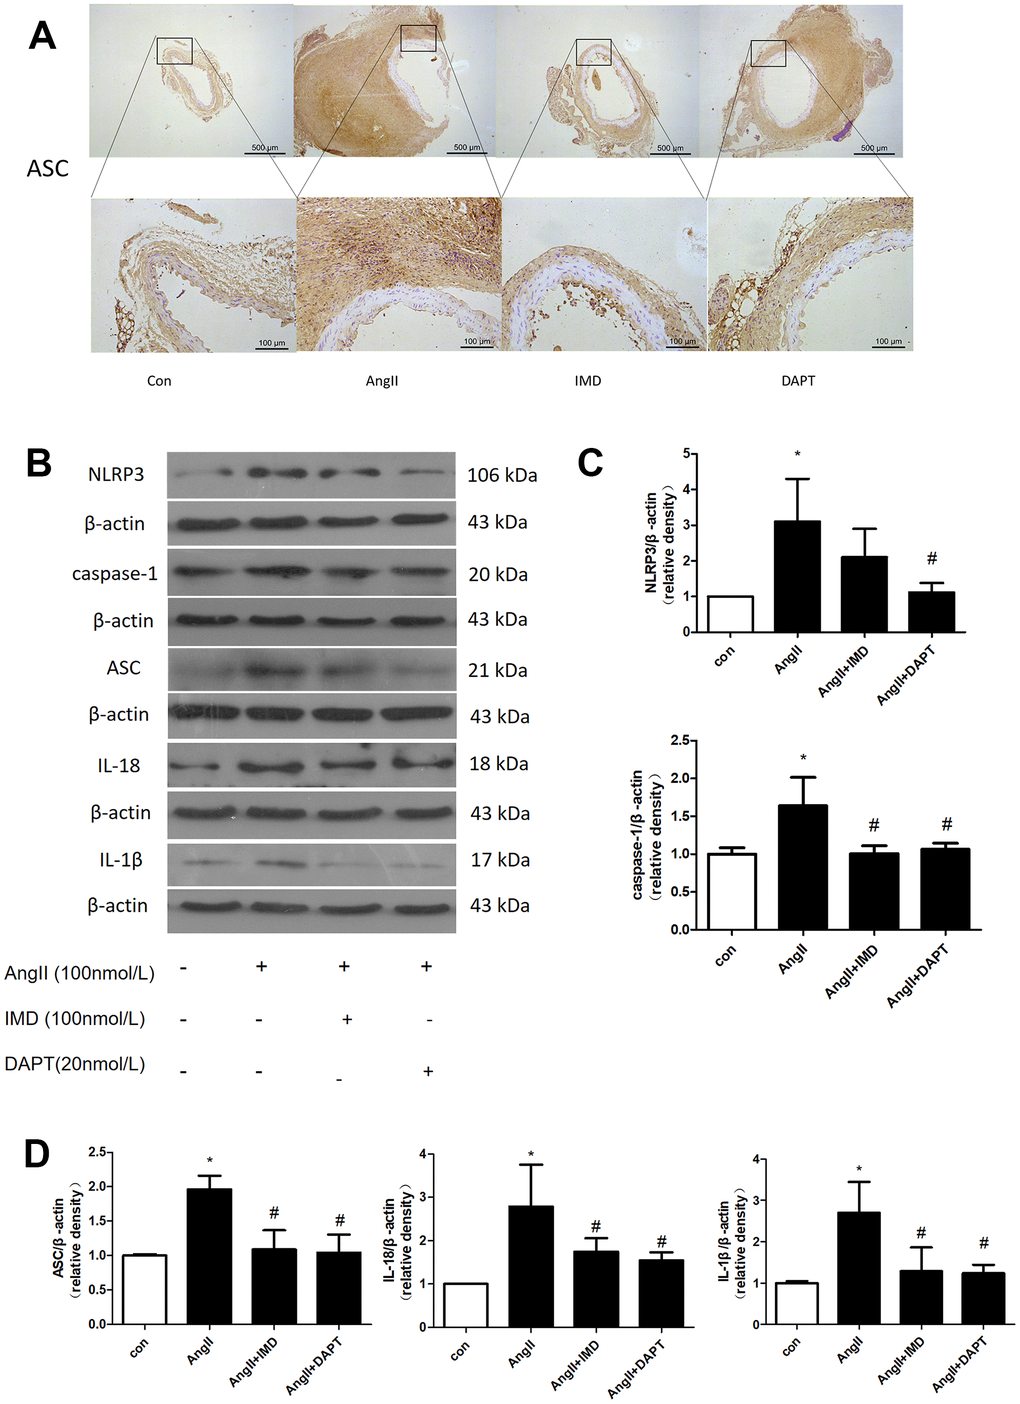 NLRP3 inflammasome activation was inhibited by IMD via Notch1 signaling. (A) Immunohistochemistry analysis of the protein expression of ASC in aortas of Control, AngII, AngII+IMD and AngII+DAPT mice. Control, saline infusion; AngII, AngII (1000 ng/kg/min) infusion; AngII+IMD (300 ng/kg/min) infusion; AngII+DAPT (10 mg/kg) gavage for 4 weeks. Scale bar, 500 μm, 100 μm. Boxes and arrows show enlarged areas. (B) Western blot analysis of protein levels of NLRP3, ASC, caspase-1, IL-1β, IL-18 in Raw264.7 macrophage cell line. The cell line was exposed to PBS, AngII (100 nm, 1 h) and DAPT (20 nm, 1 h). (C, D) Quantification of (B). n=3, Data are mean ± SD. *P#P